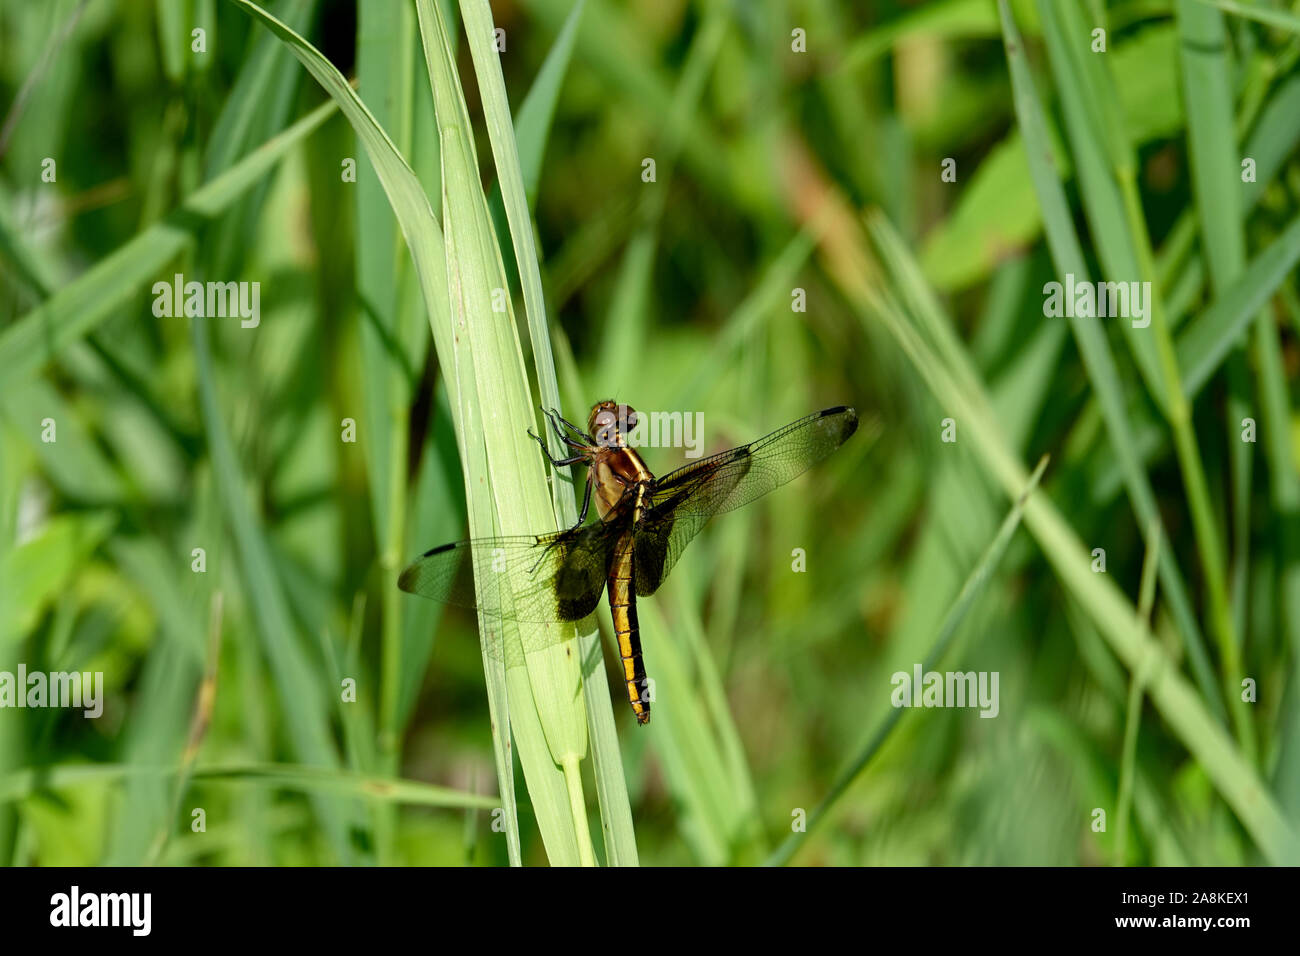 Widow Skimmer Dragonfly Perched on Leaf Stock Photo